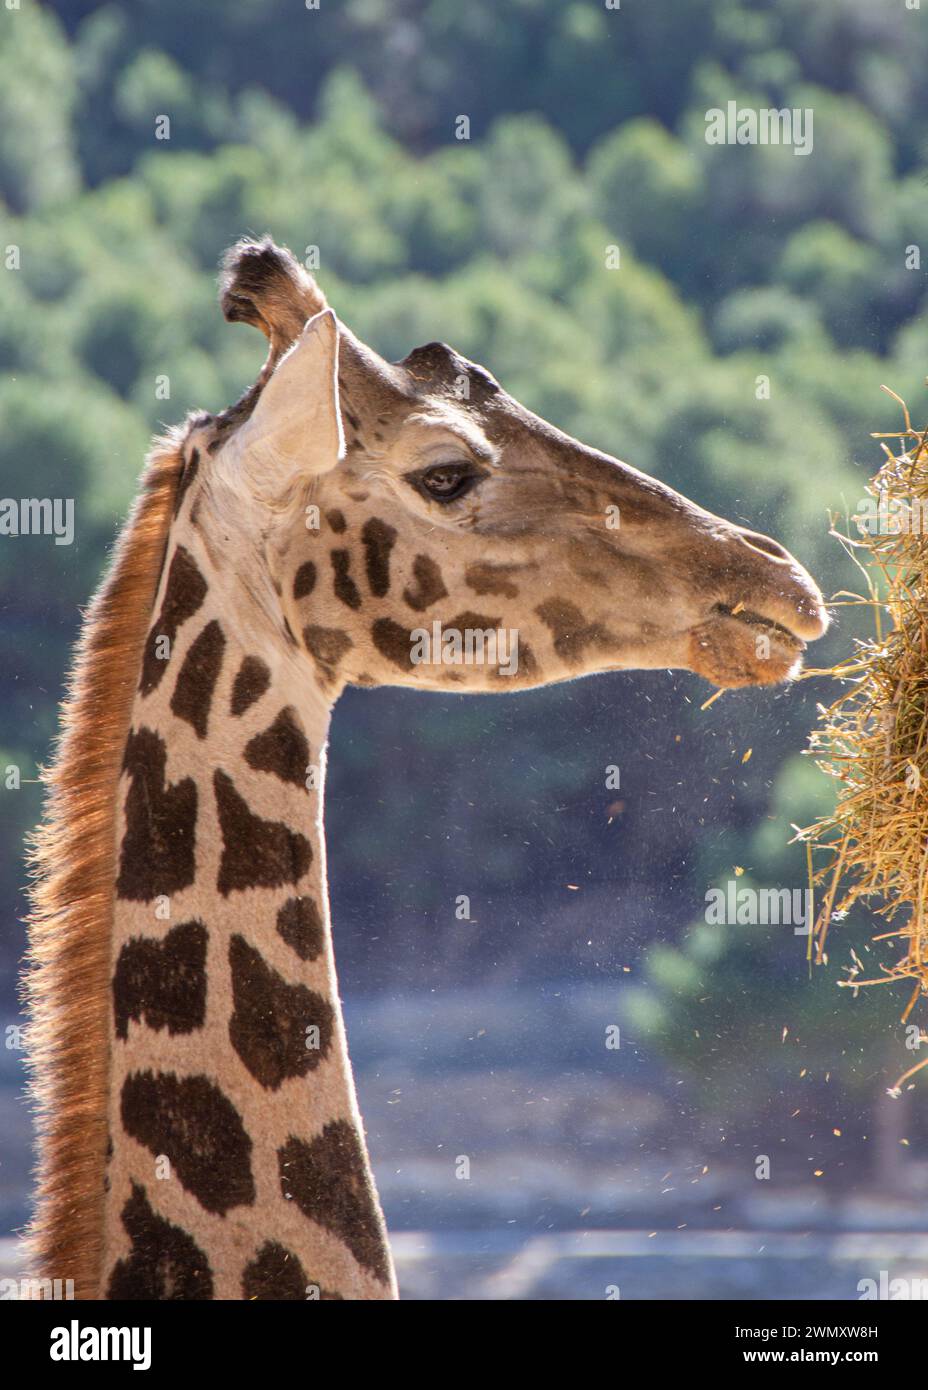 Close-up of the head of a captive giraffe eating hay in Aitana safari park, Spain, outside during the day. Stock Photo